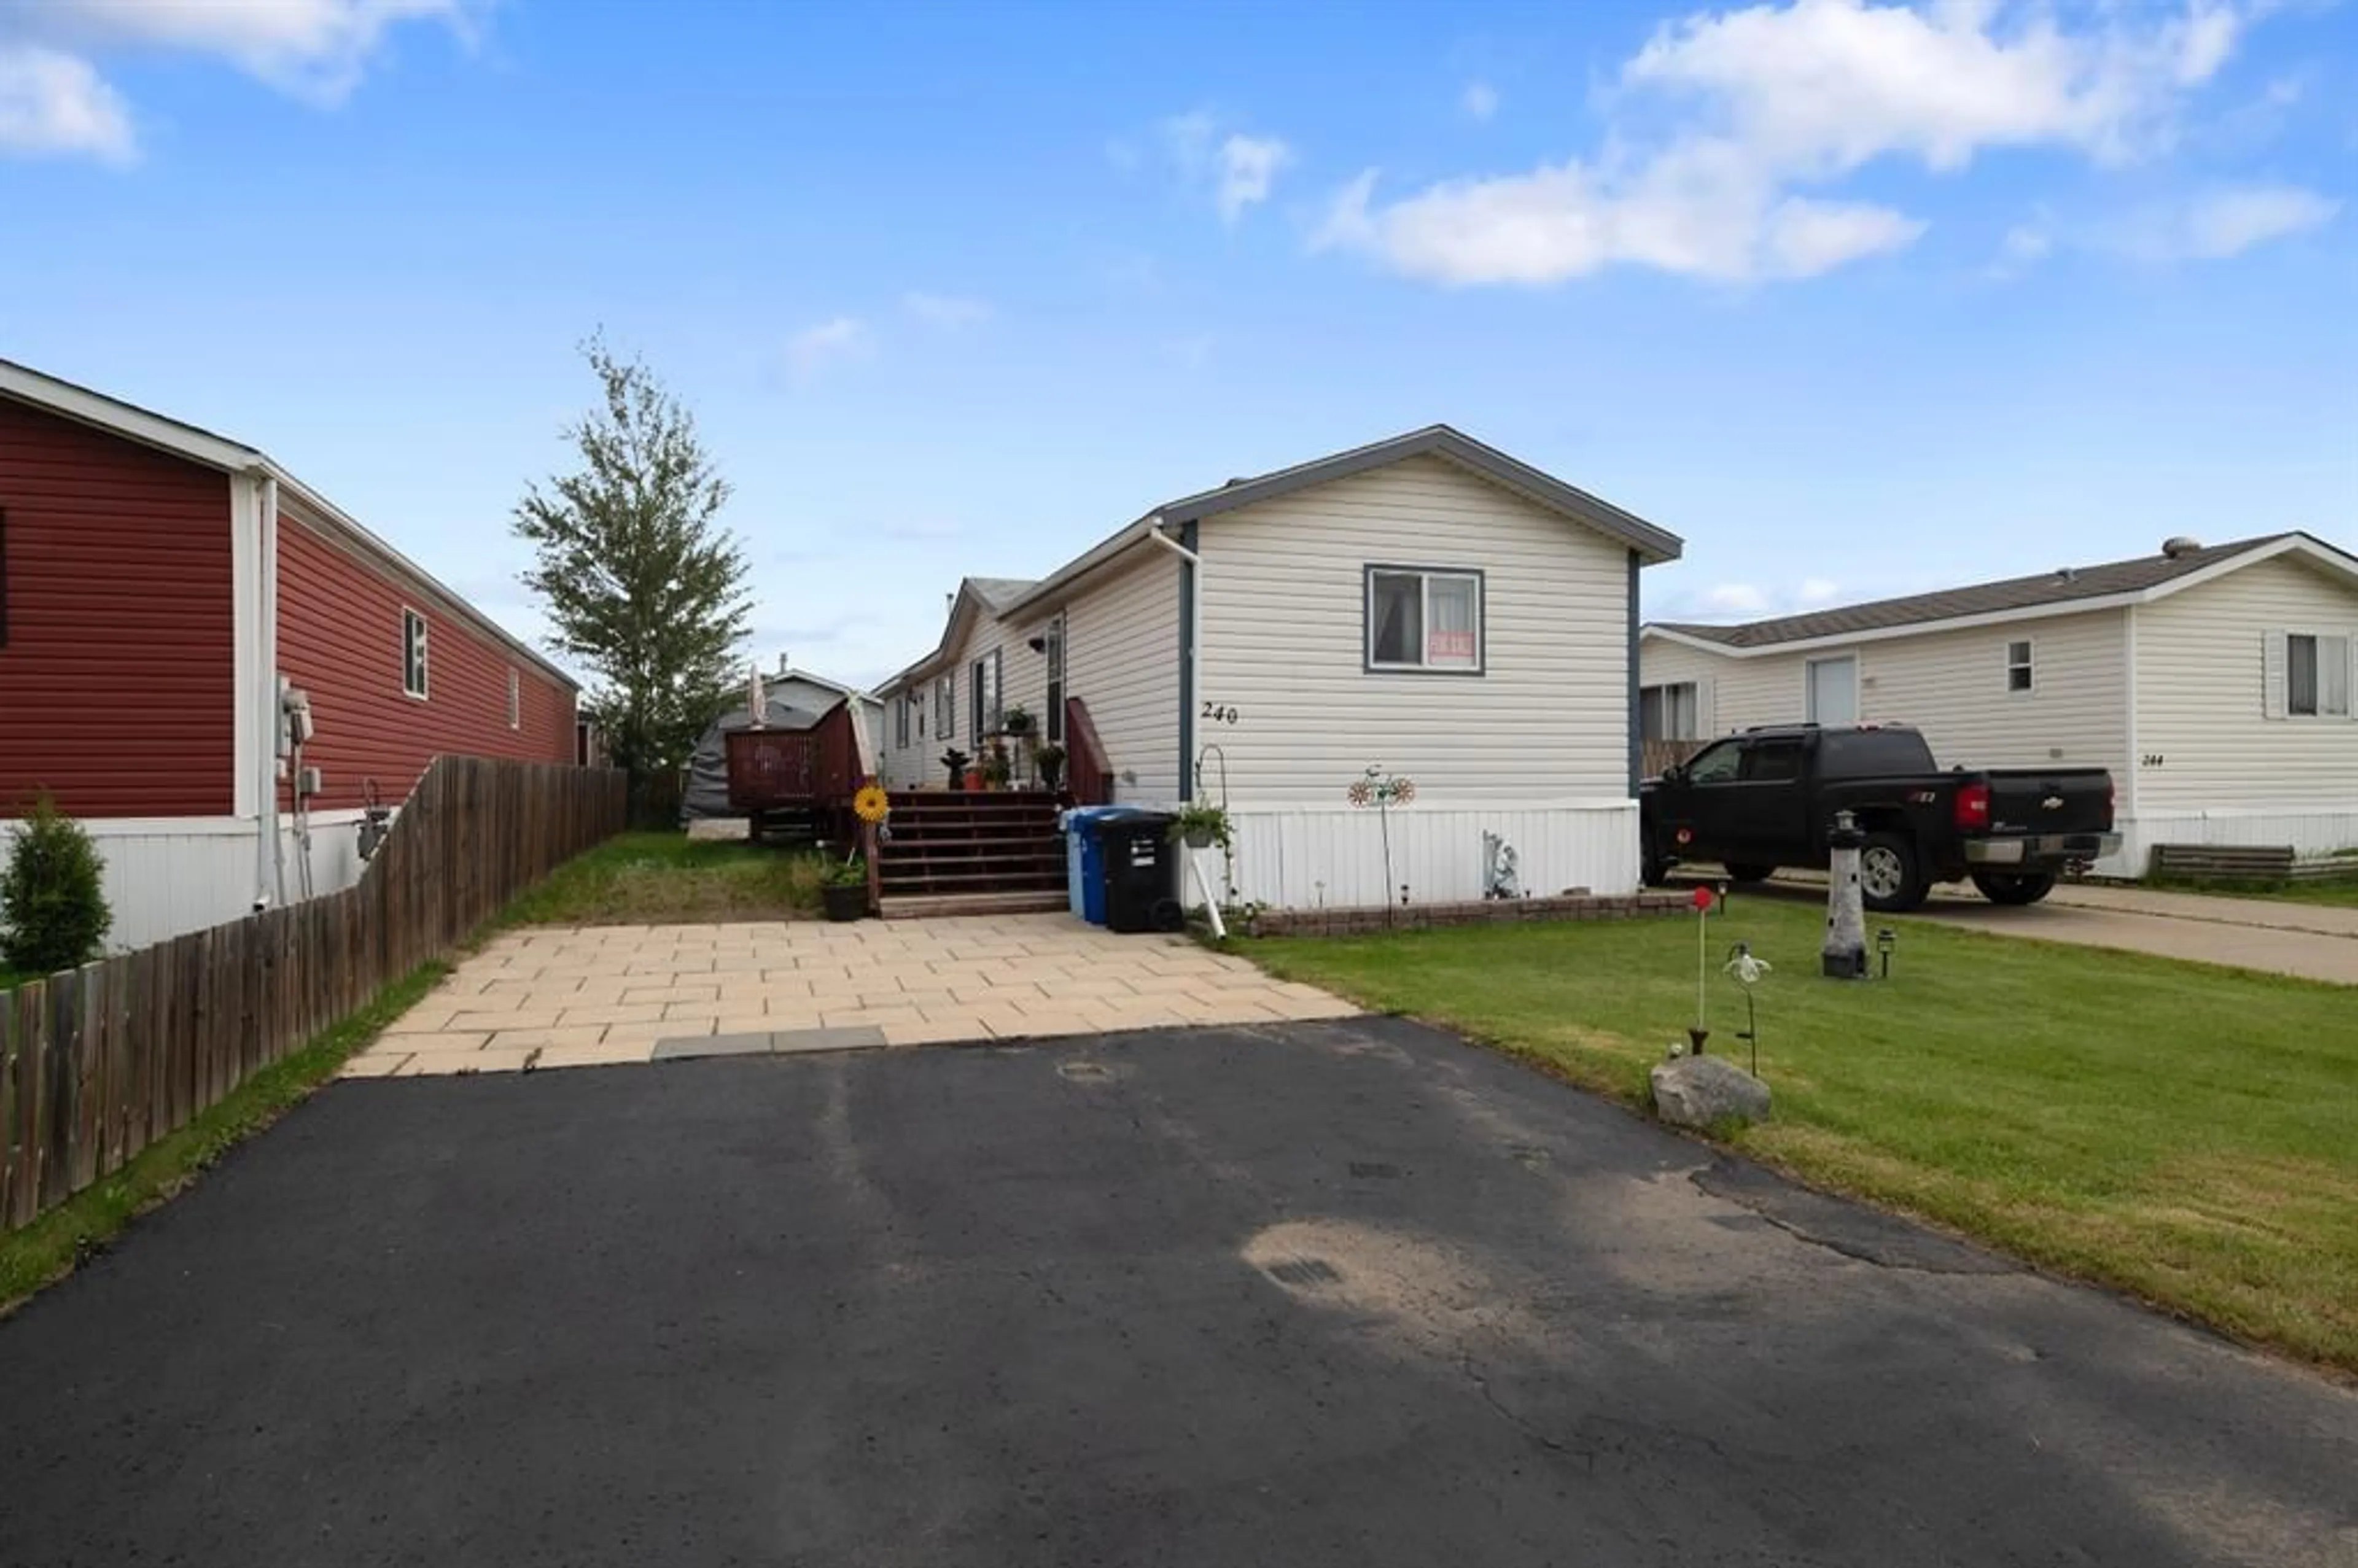 Frontside or backside of a home for 240 Palomino Close, Fort McMurray Alberta T9H 5M2